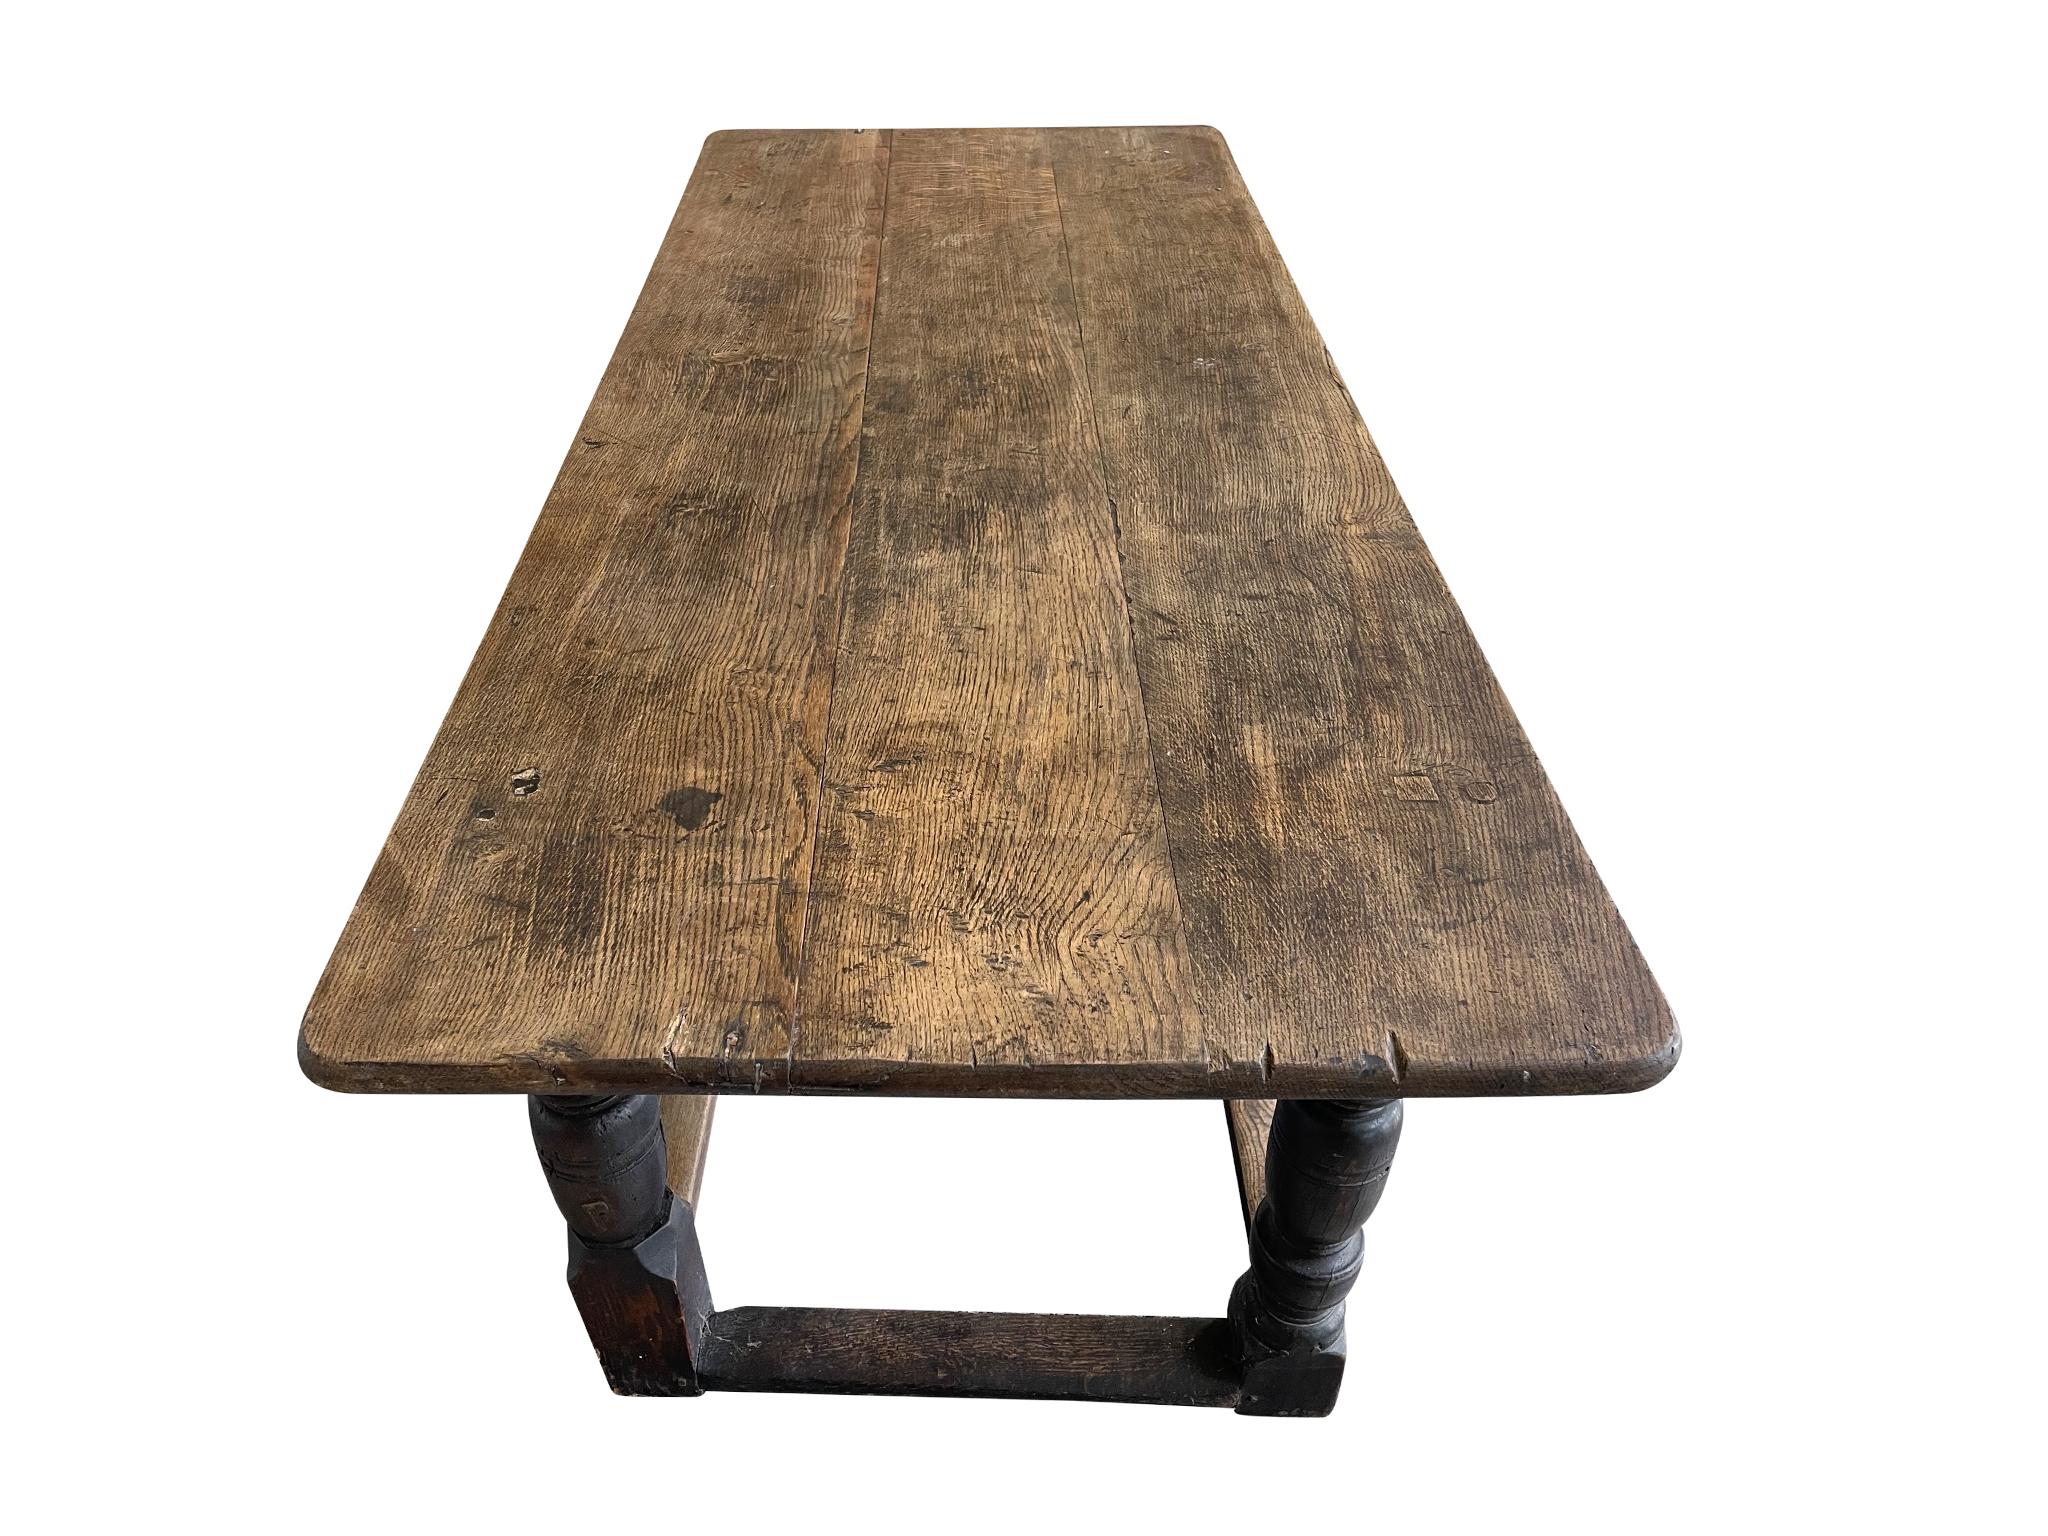 Hand-Carved Antique English Oak Table